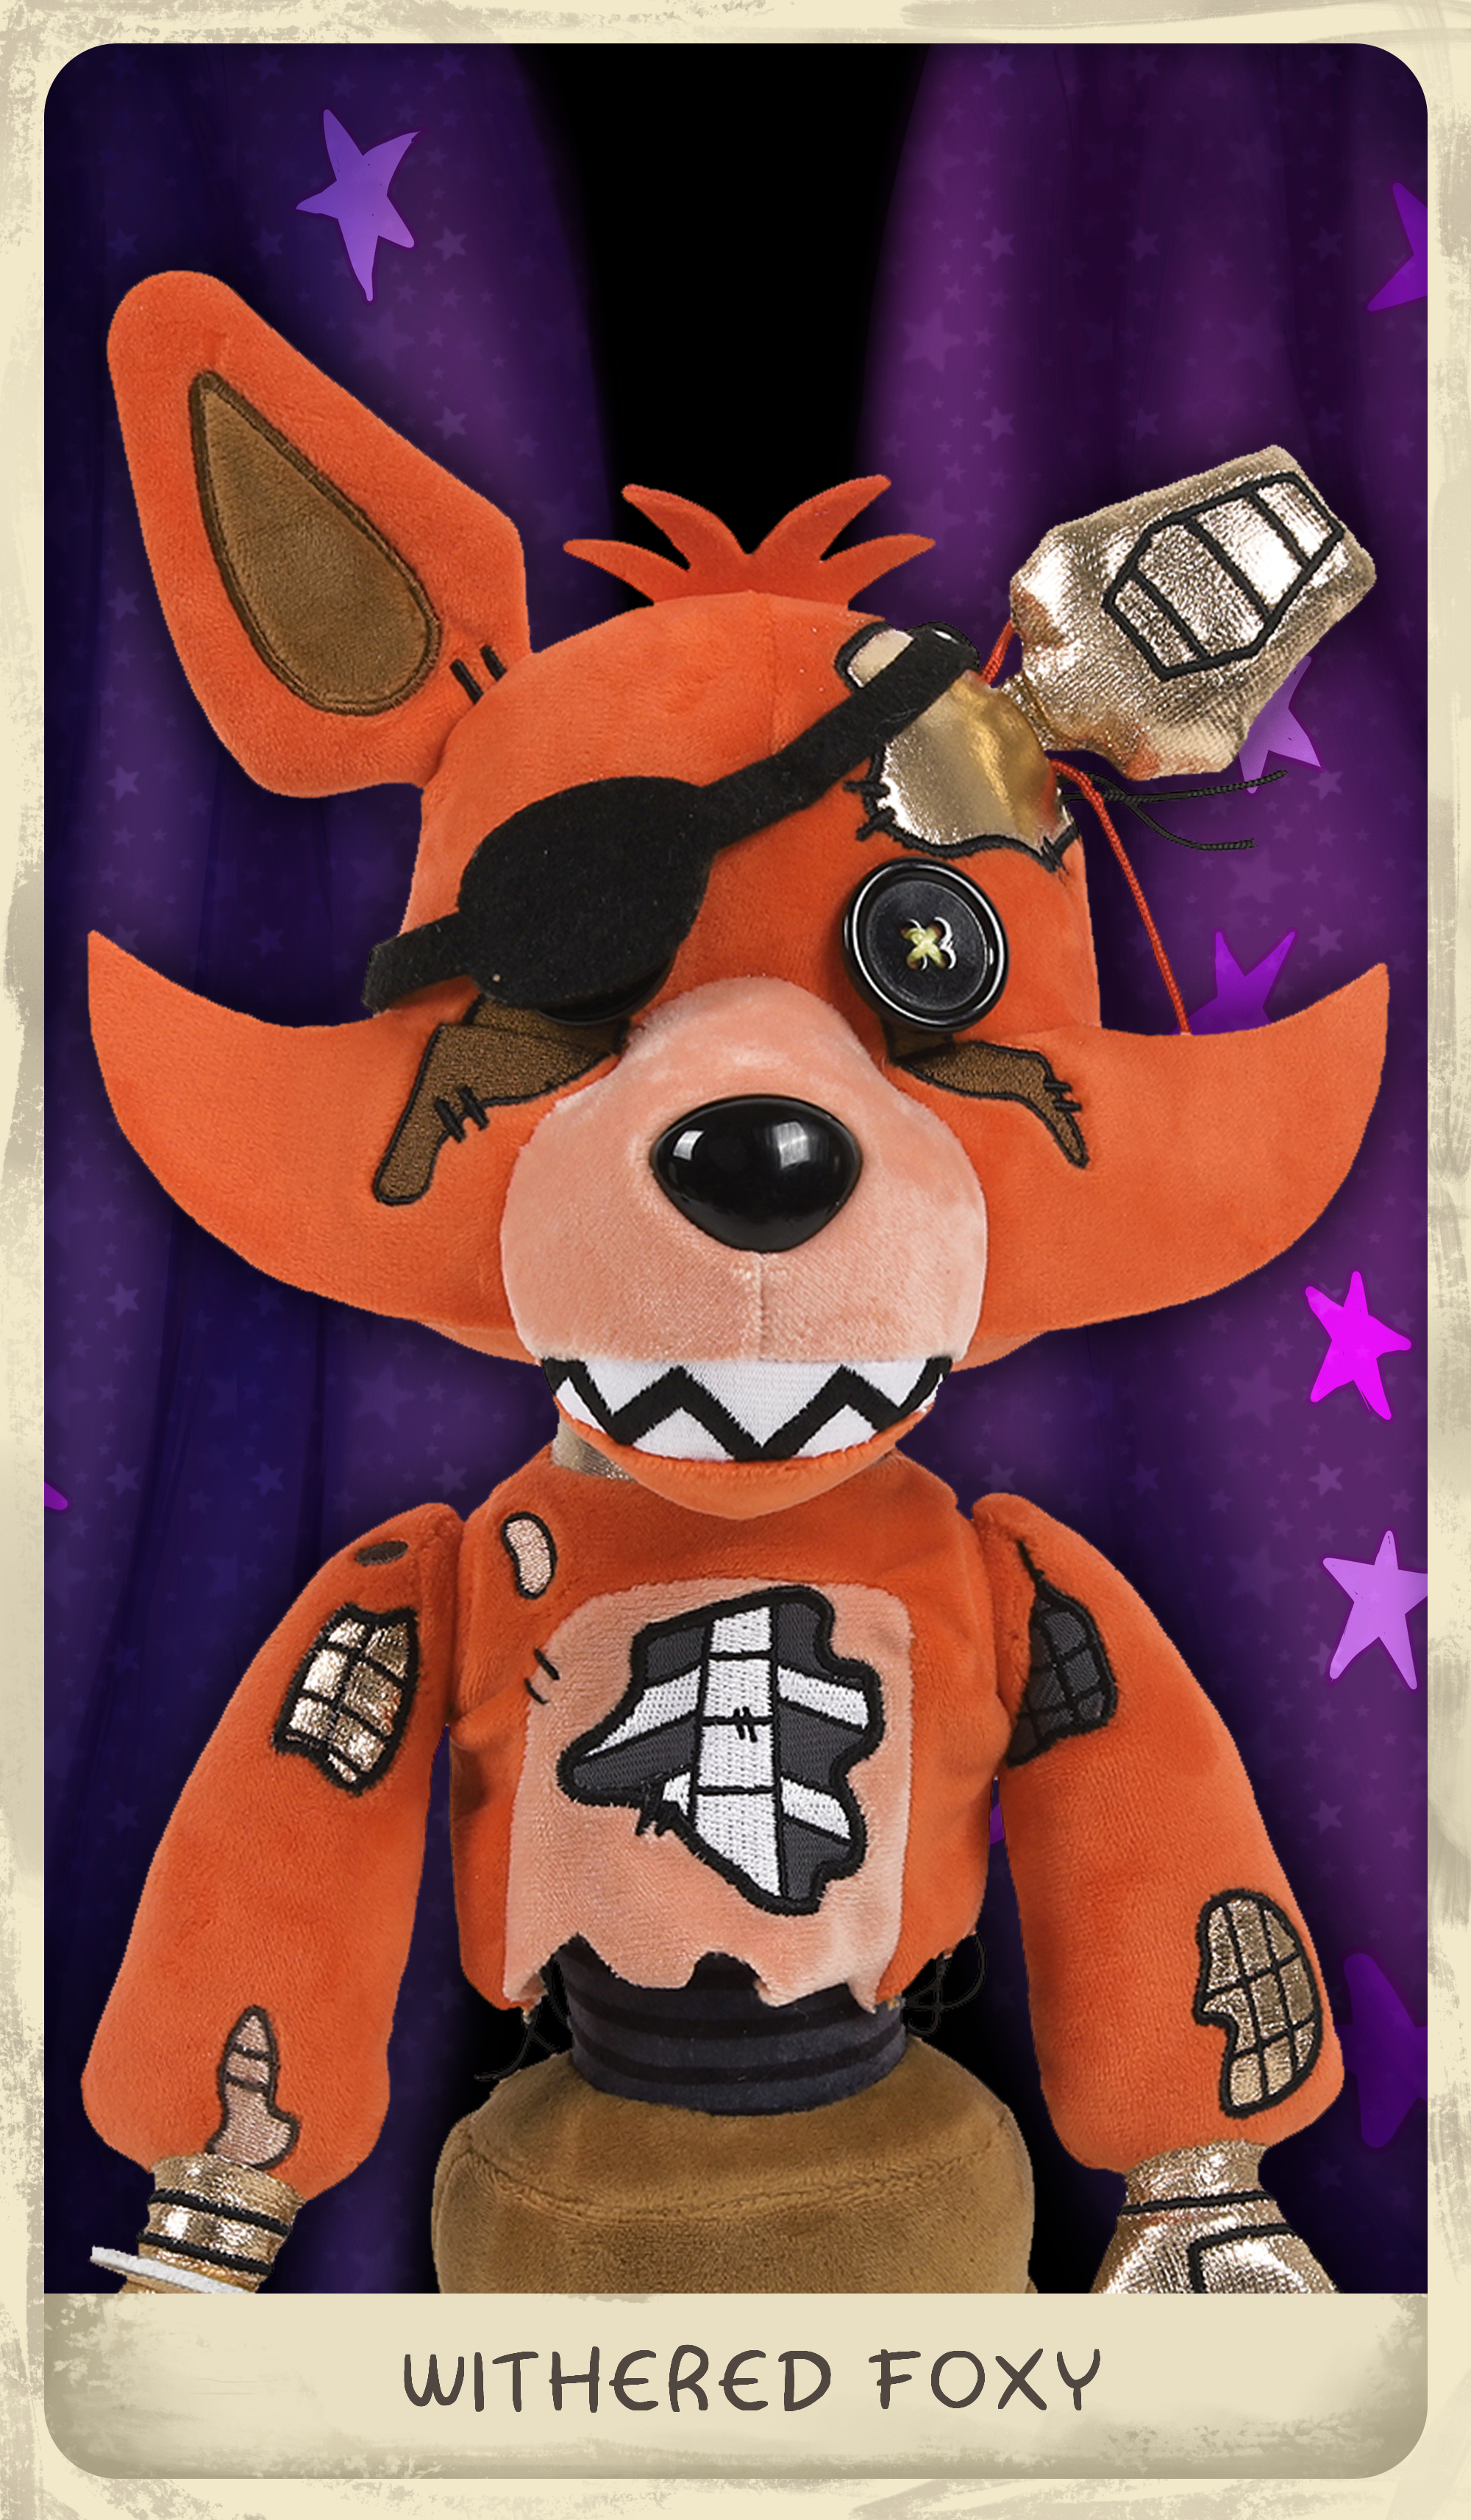 New Withered Foxy Plush Toy Stuffed Animal Five Night Withered Fox